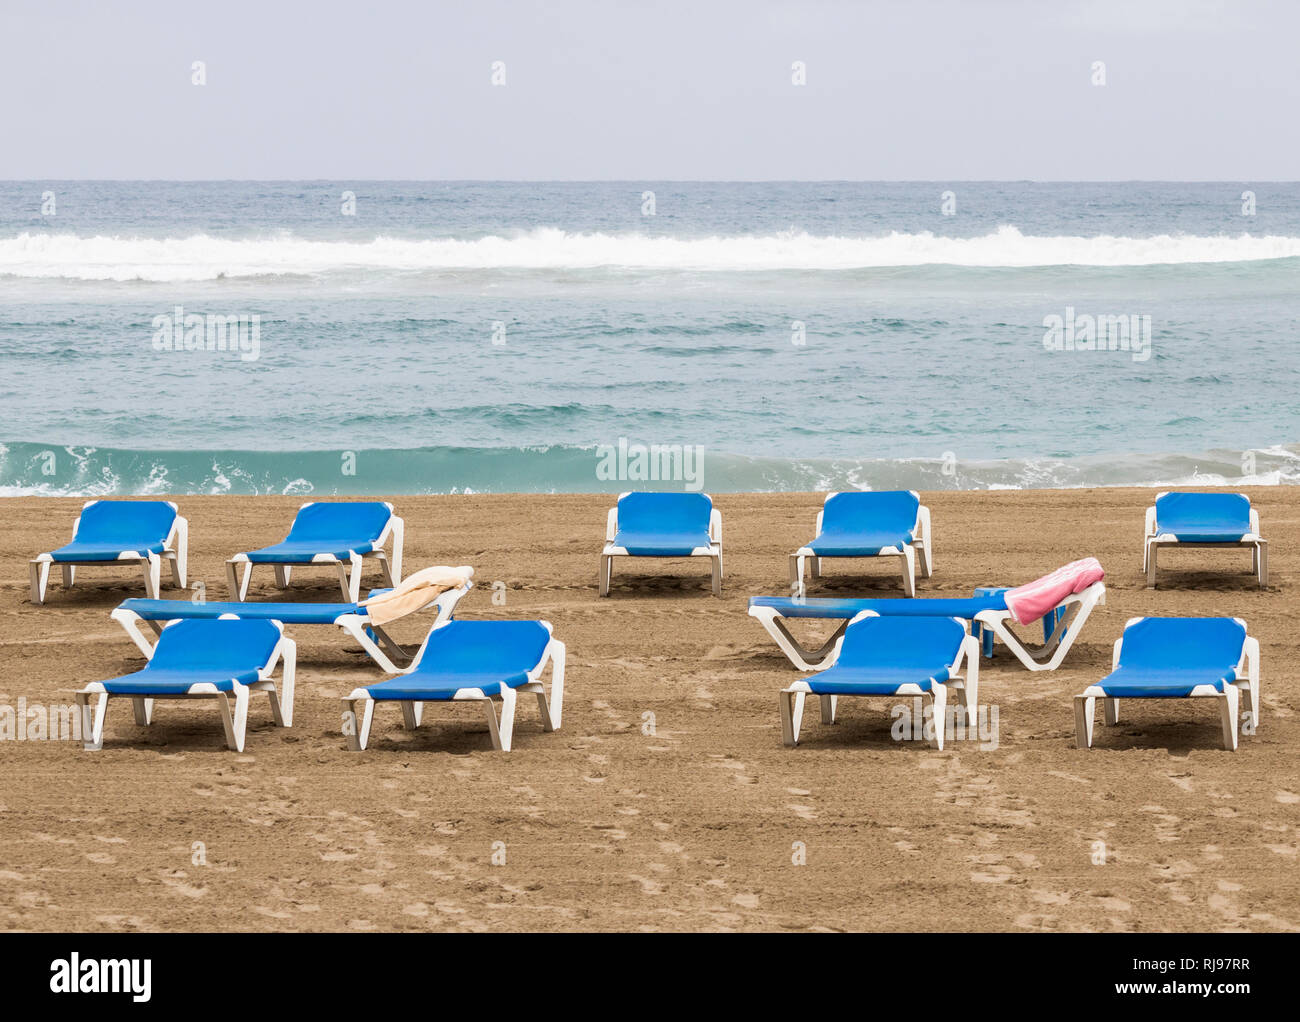 Towels on beach sunloungers in Spain Stock Photo